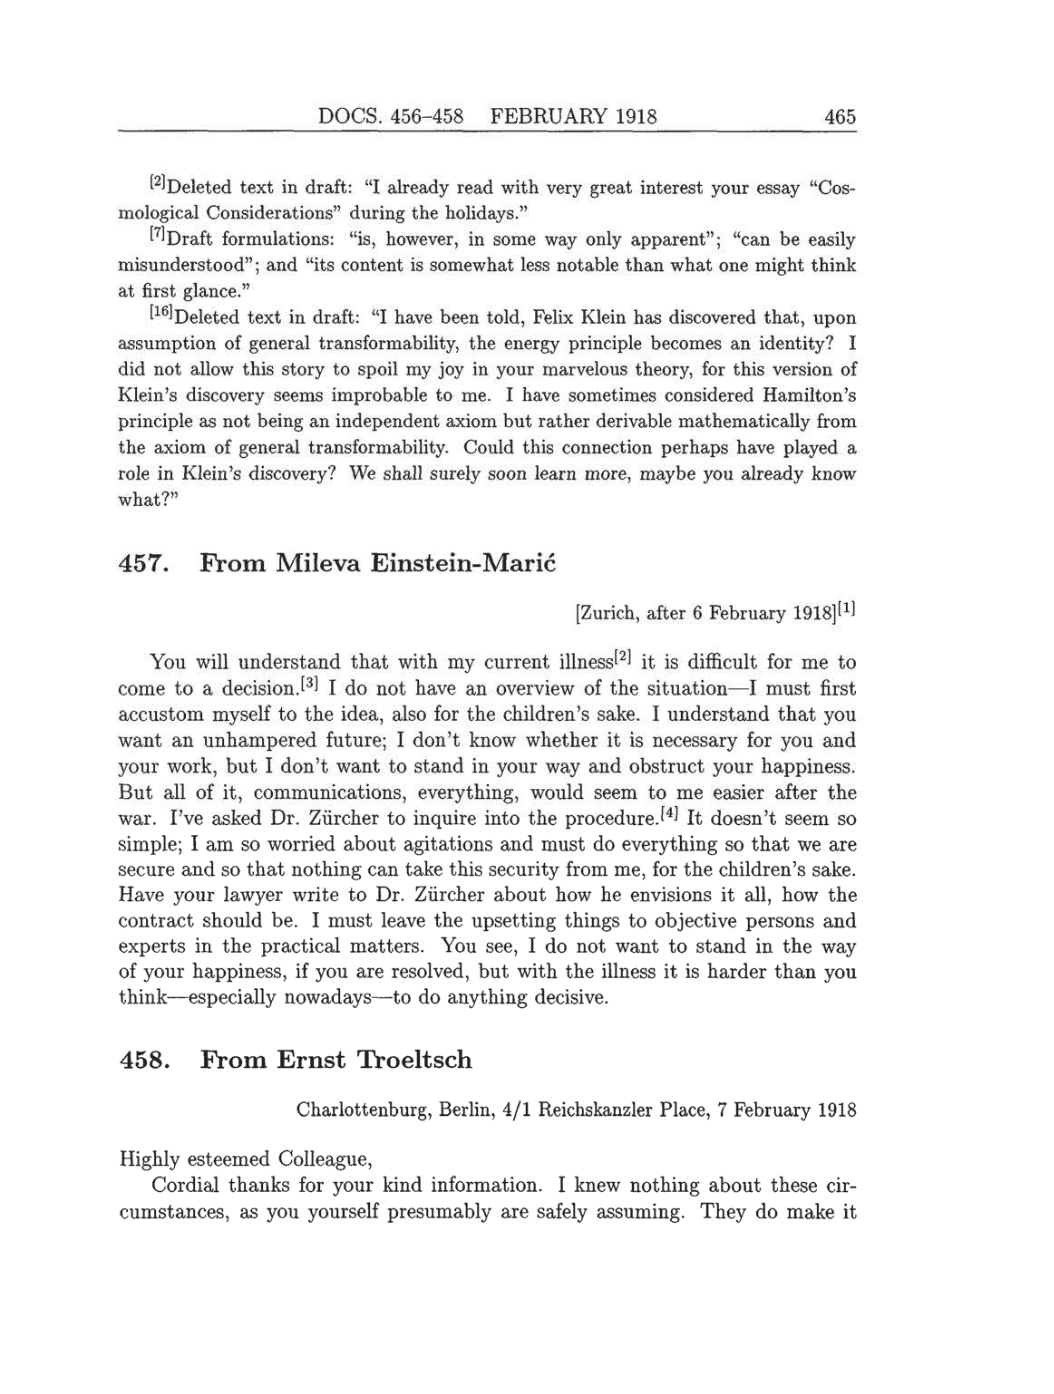 Volume 8: The Berlin Years: Correspondence, 1914-1918 (English translation supplement) page 465